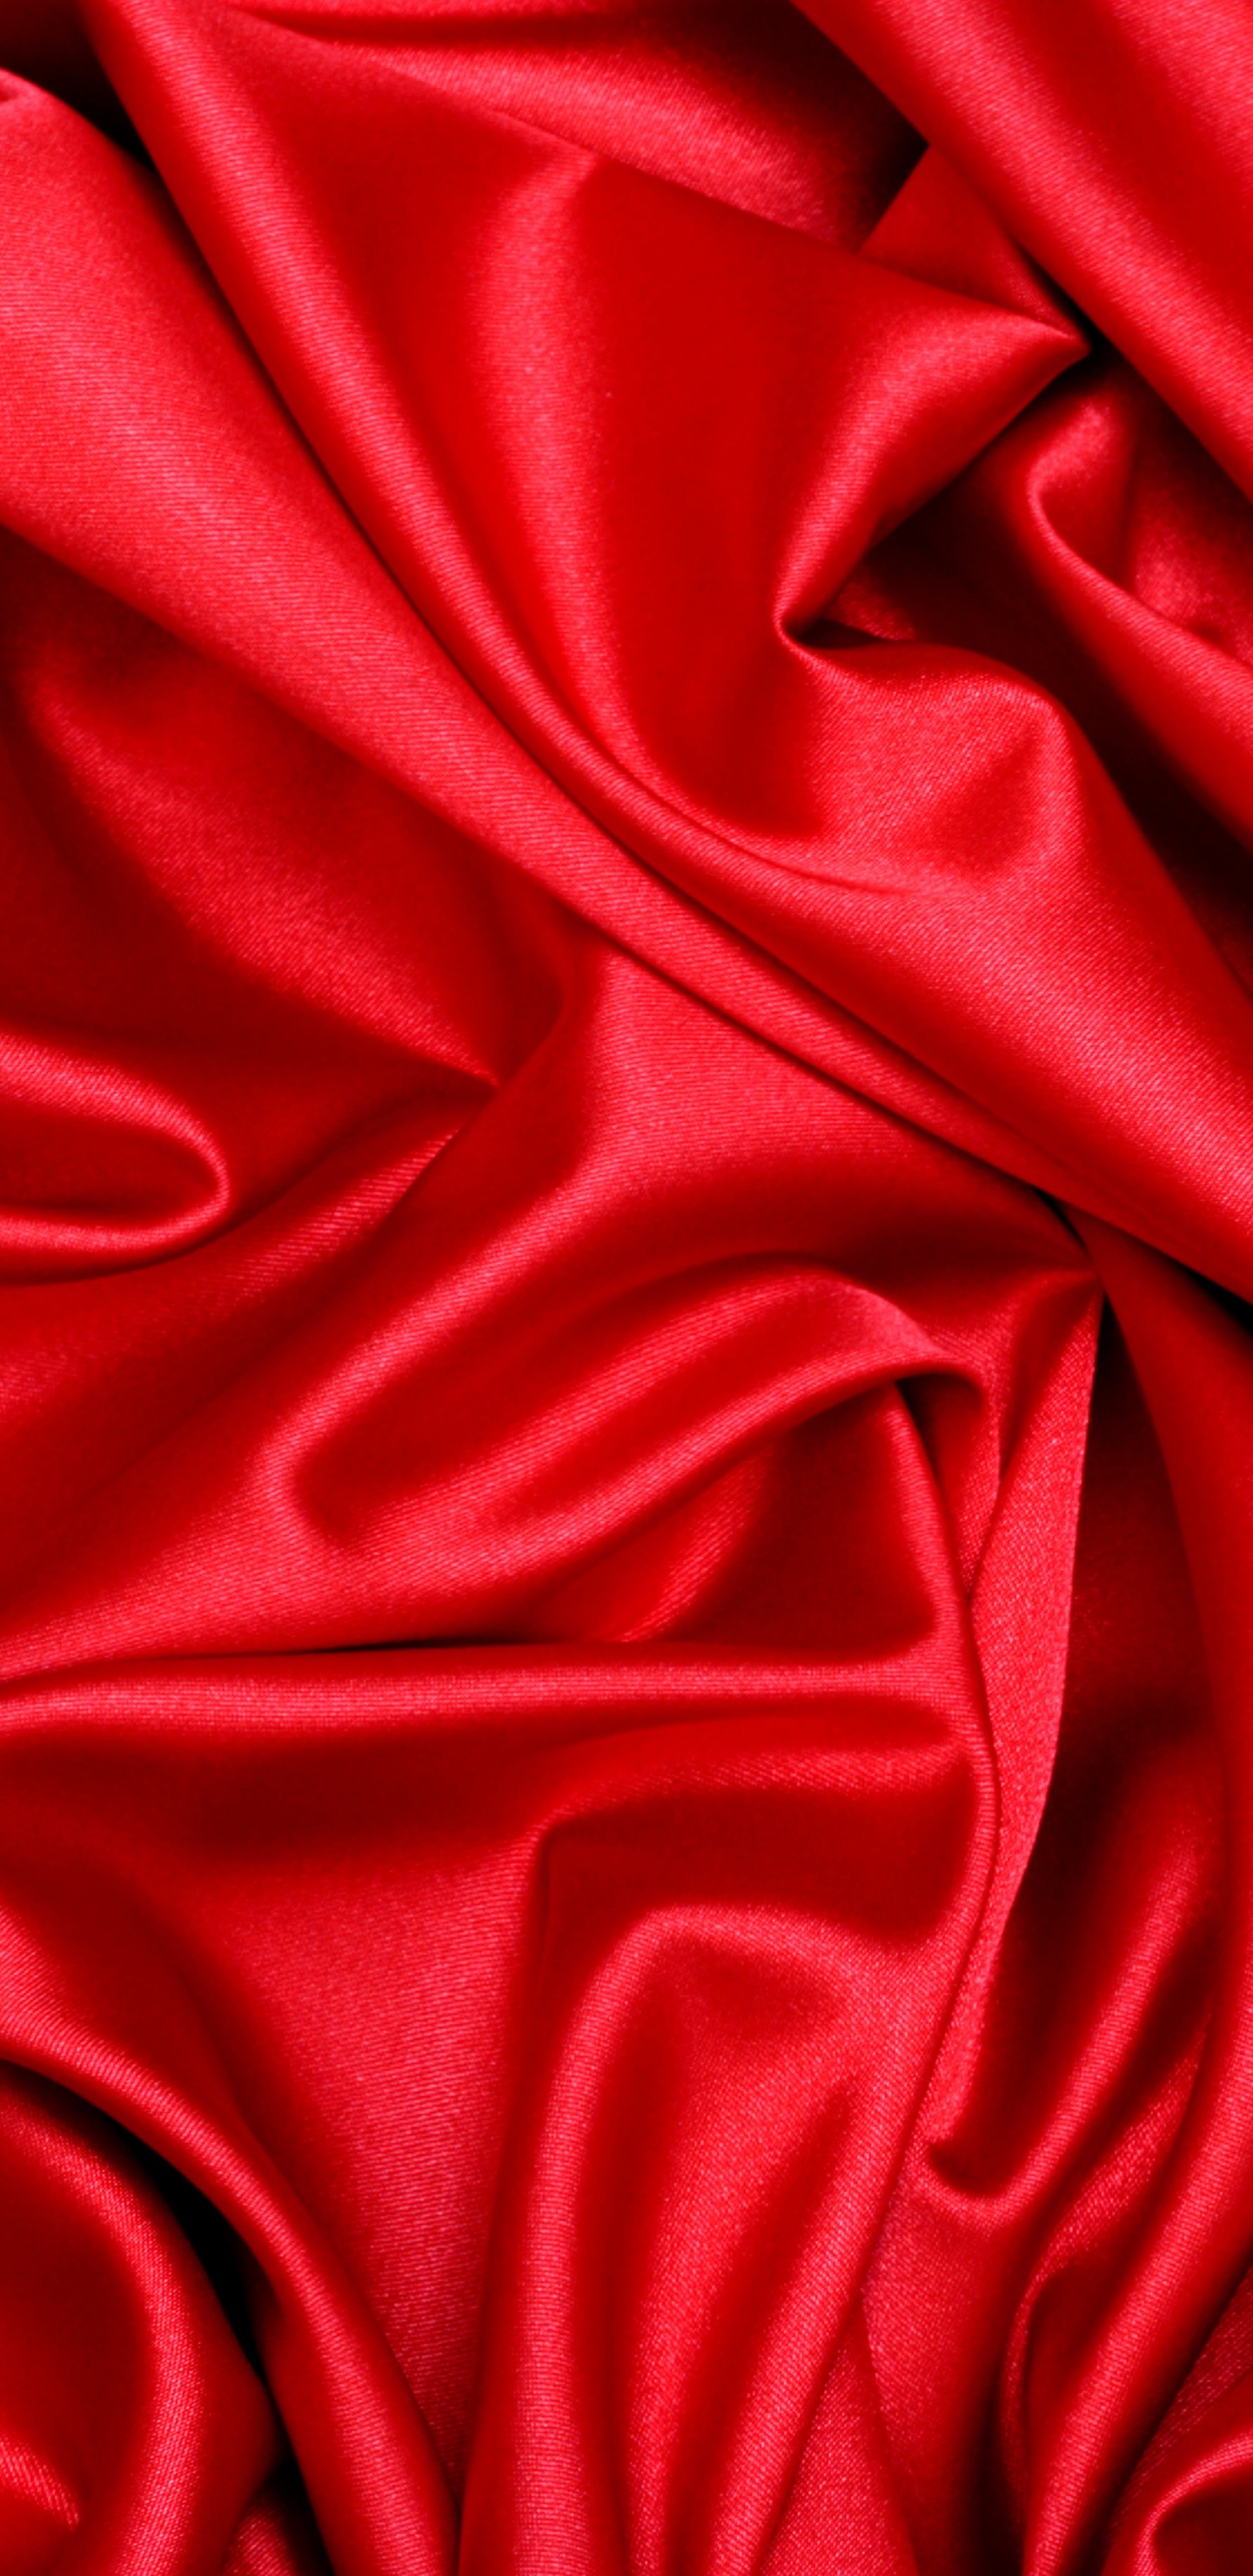 Red Textile in Close up Photography. Wallpaper in 1440x2960 Resolution